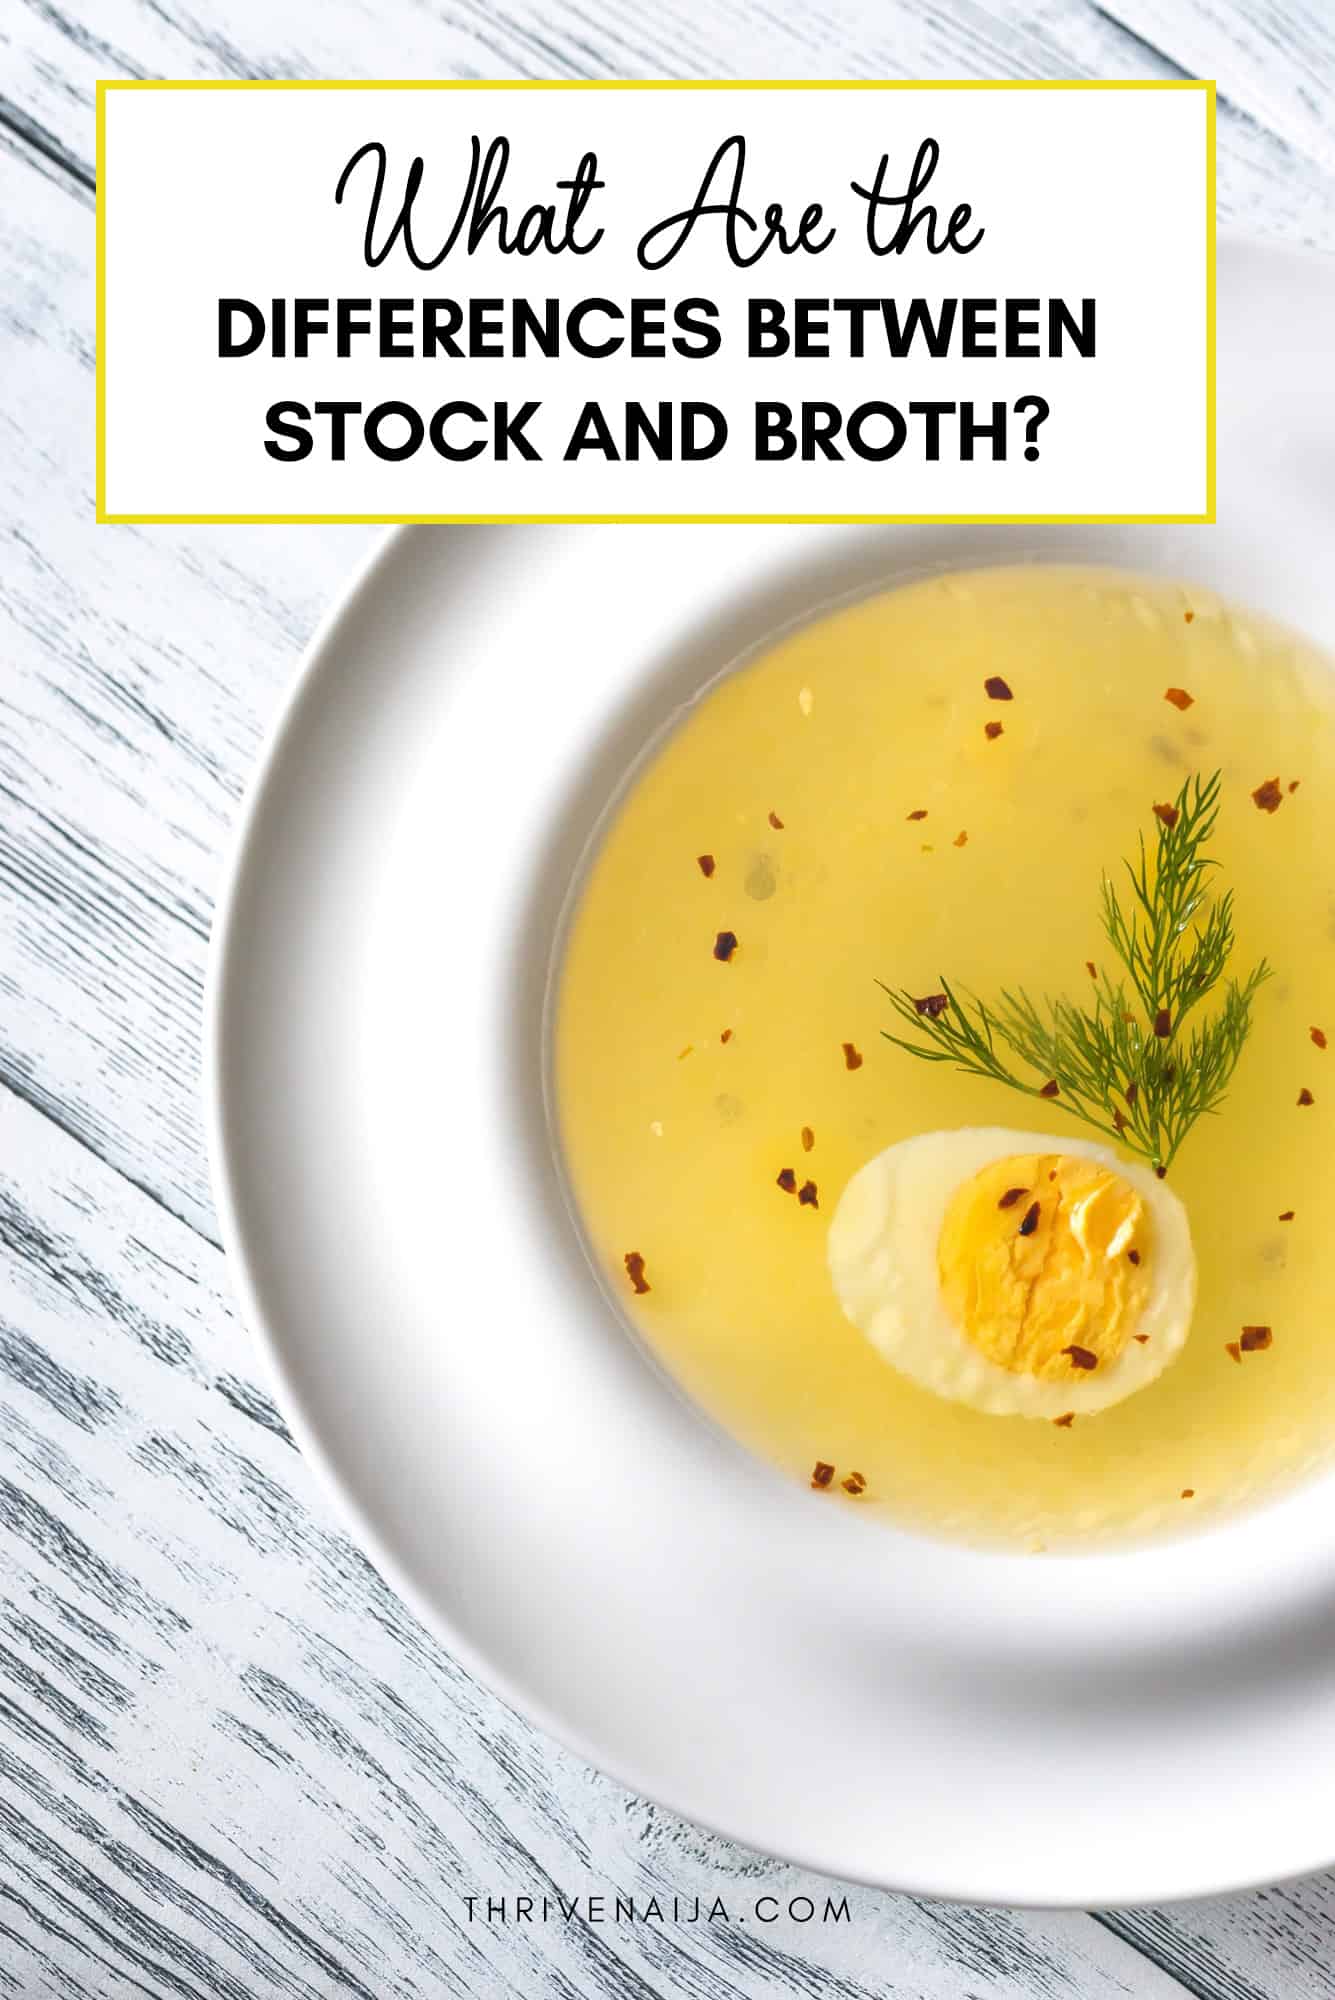 What Are the Differences Between Stock and Broth?